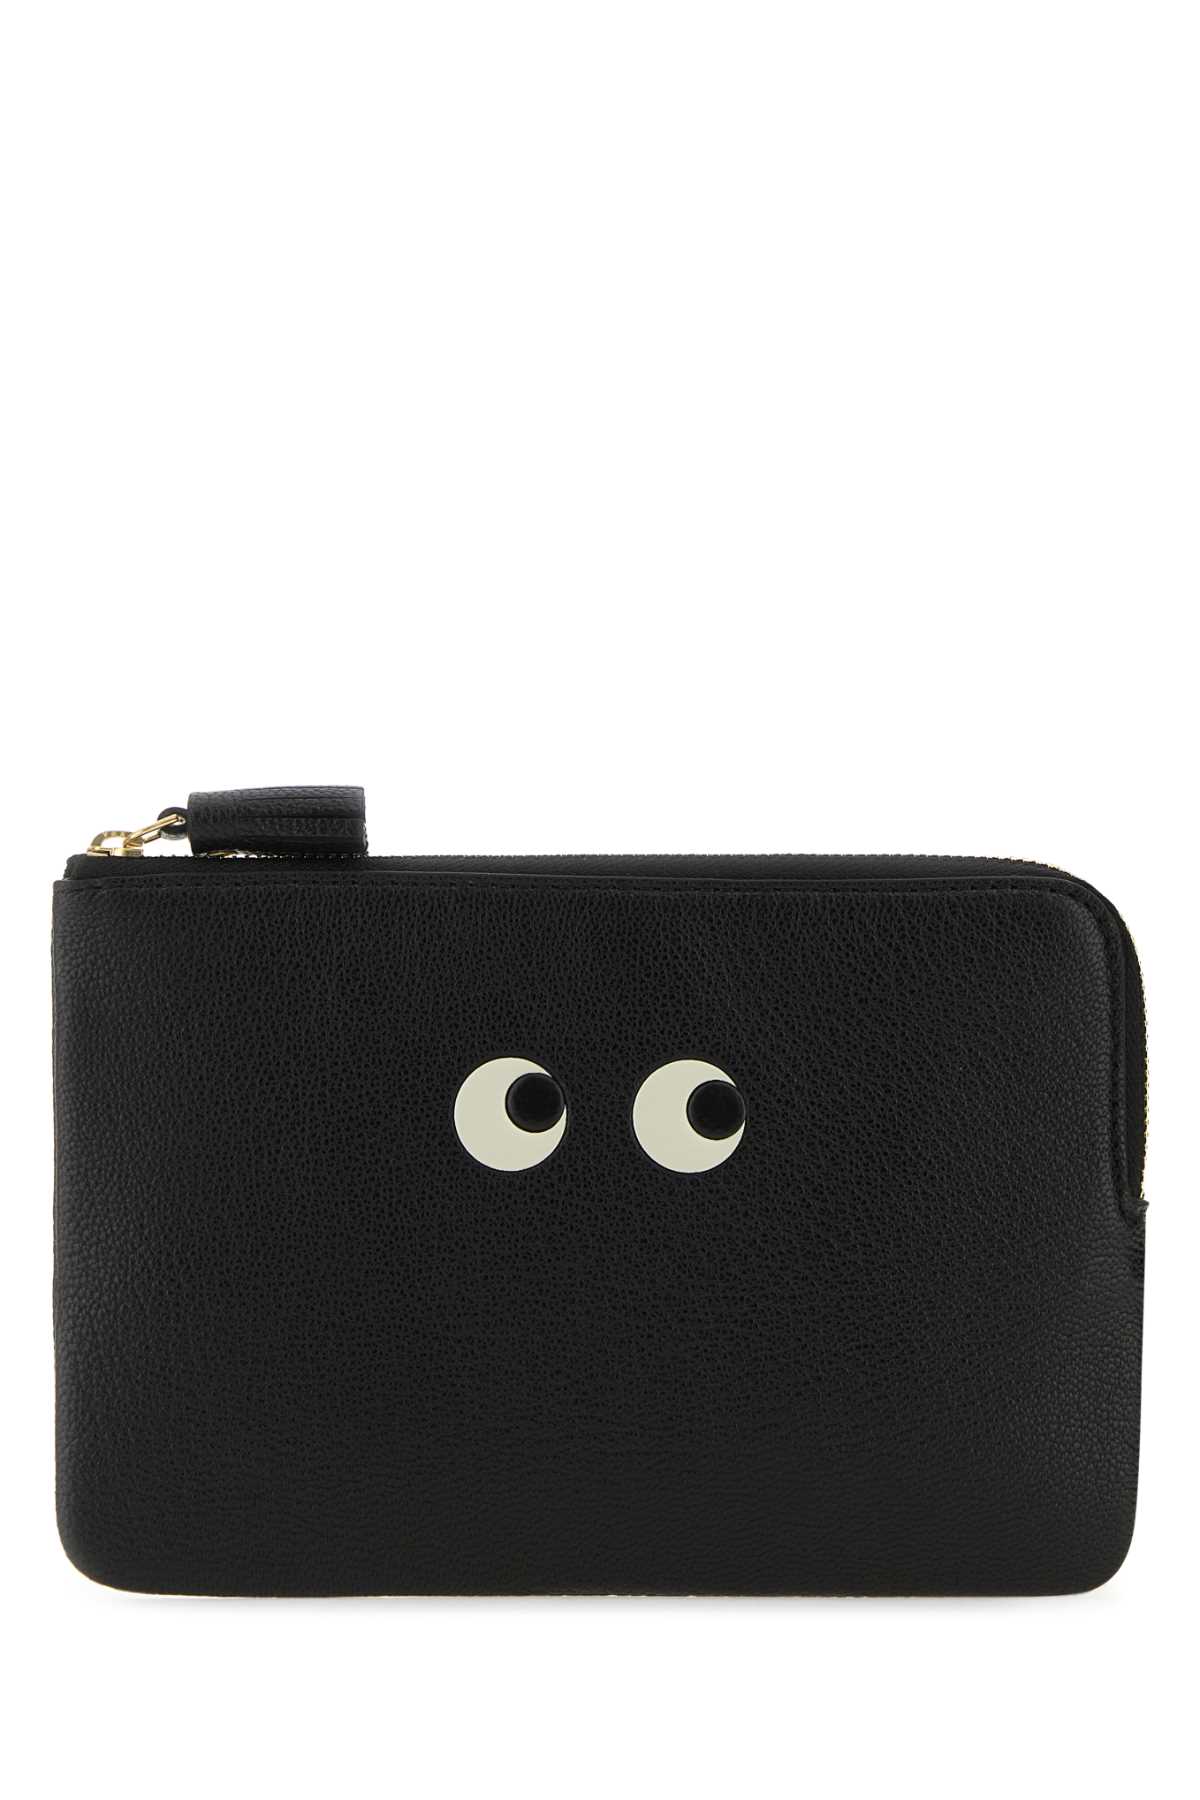 Anya Hindmarch Black Leather Loose Pocket Eyes Pouch